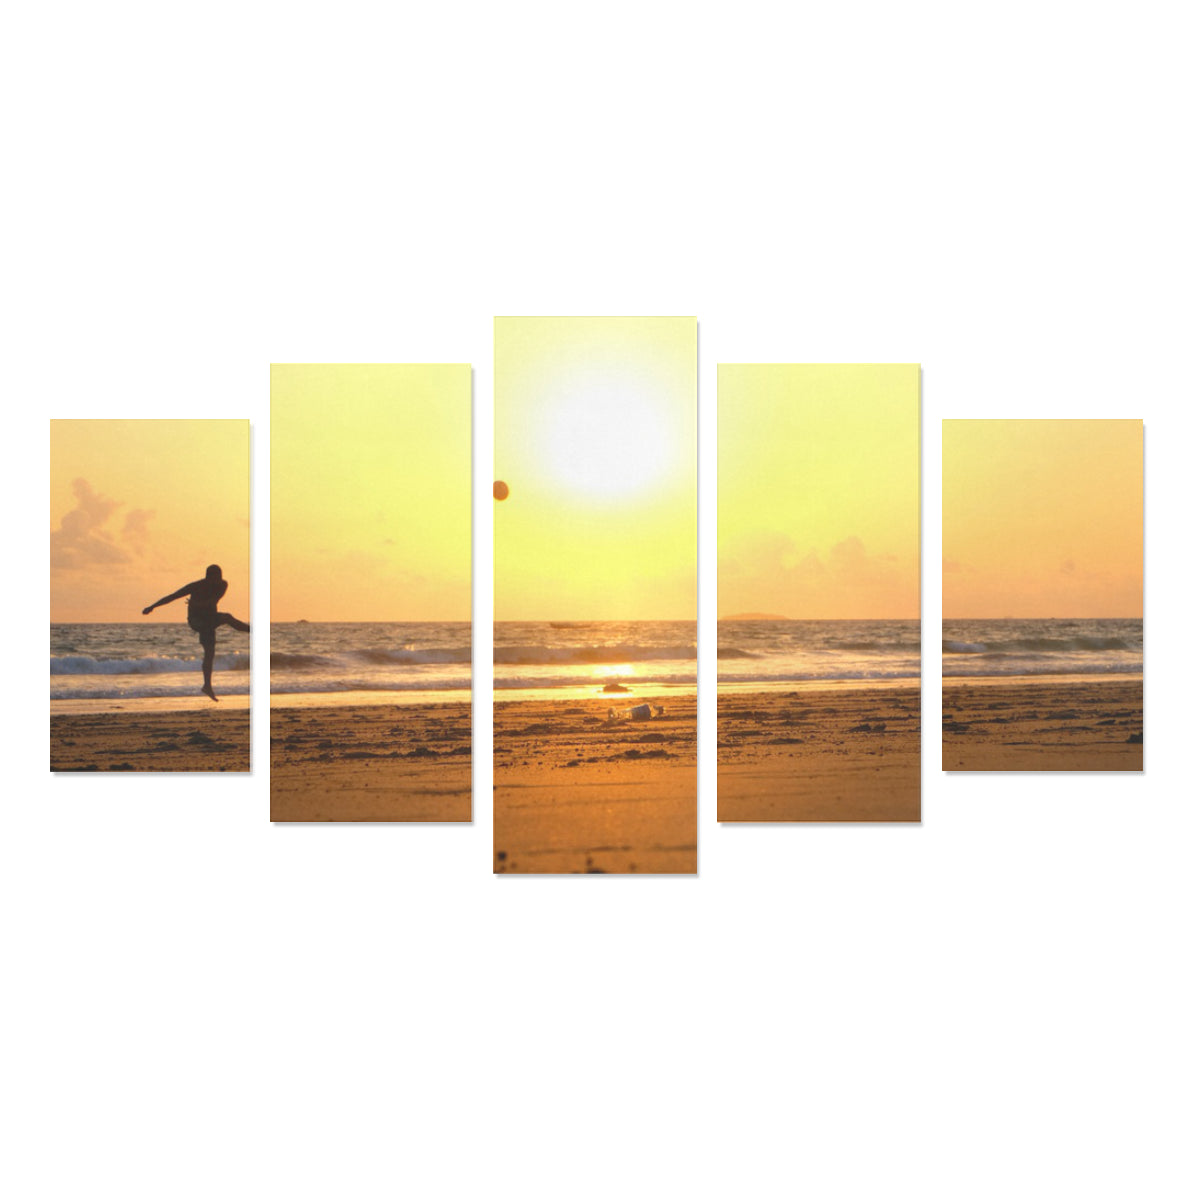 Silhouette Of Man Kicking Ball On Beach At Sunset-Soccer Empire